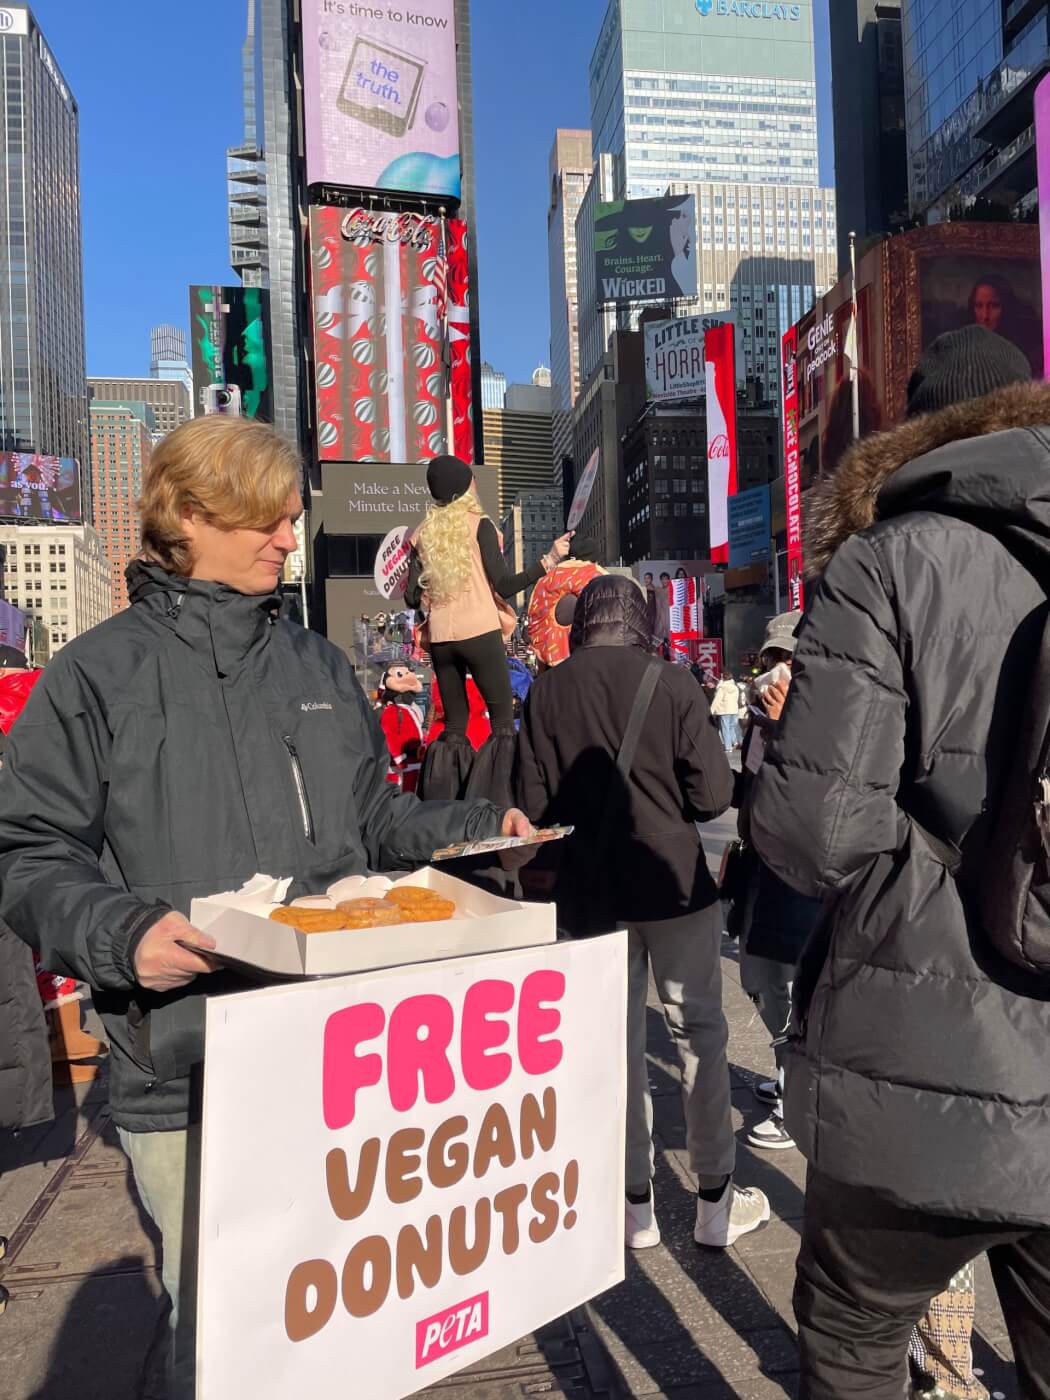 PETA hands out free vegan donuts in Times Square